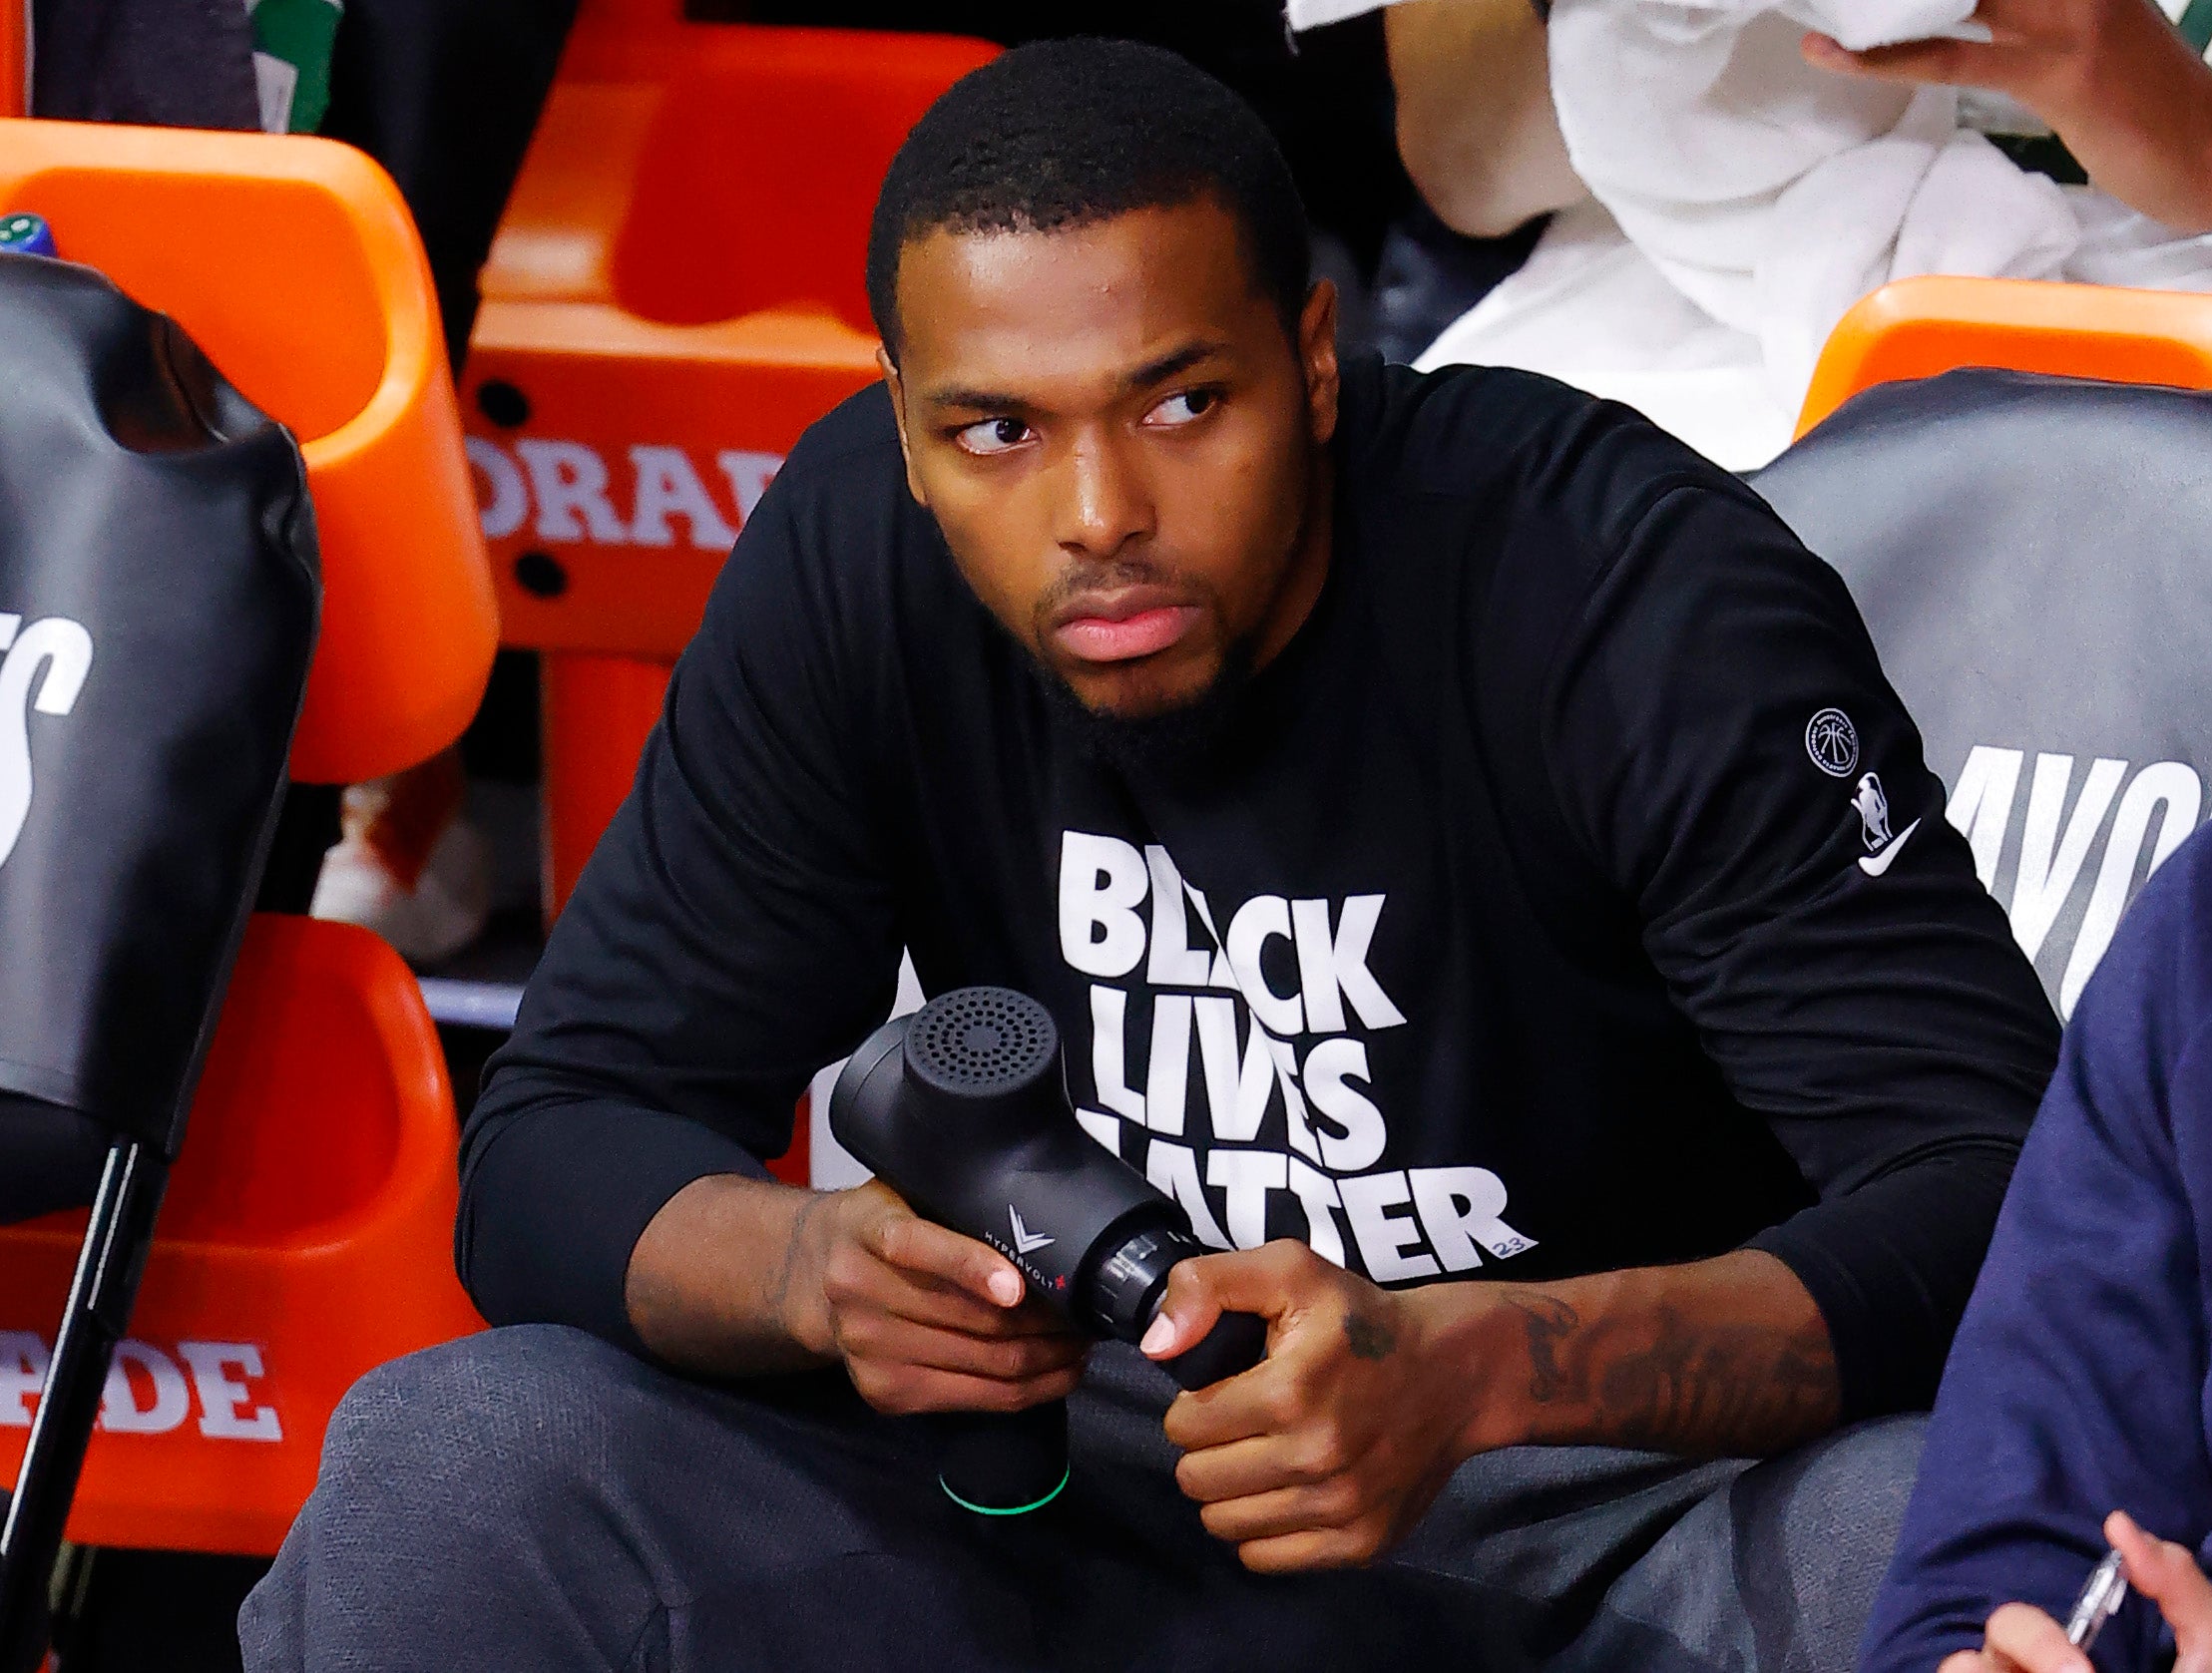 City of Milwaukee to Pay NBA Player Sterling Brown $750,000 in Police Brutality Incident